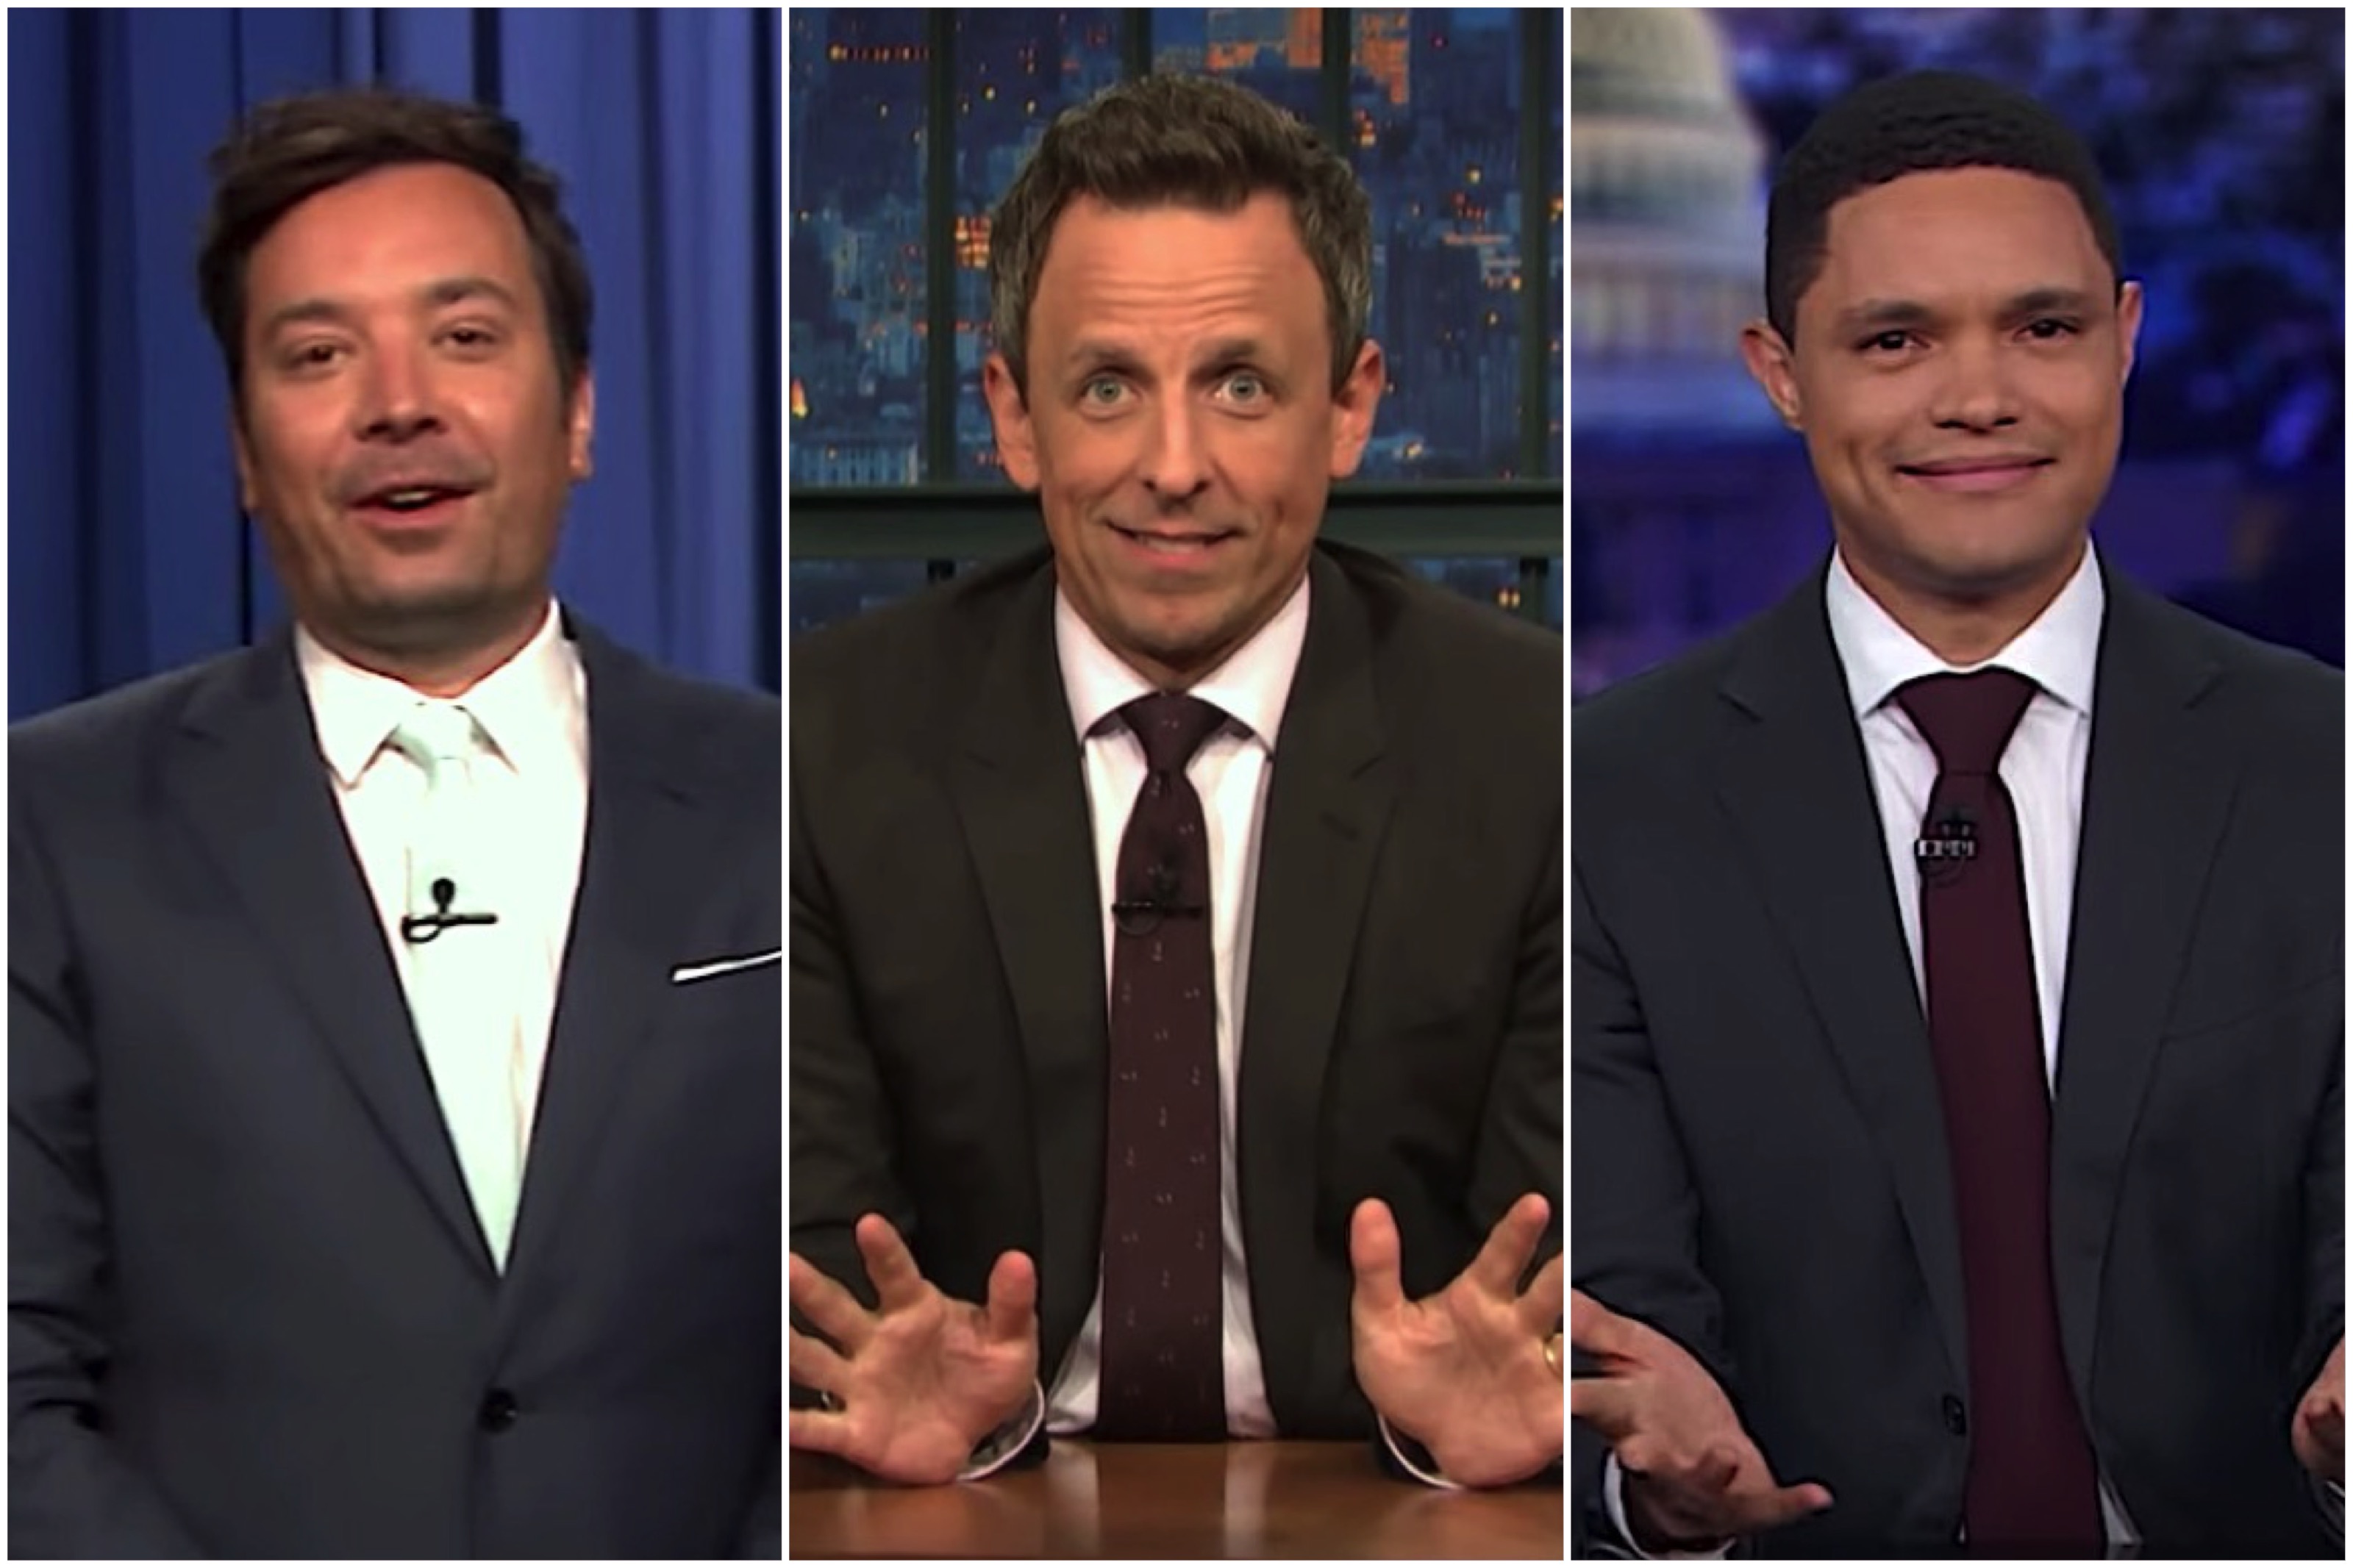 Late night hosts find creative ways to call Trump a racist